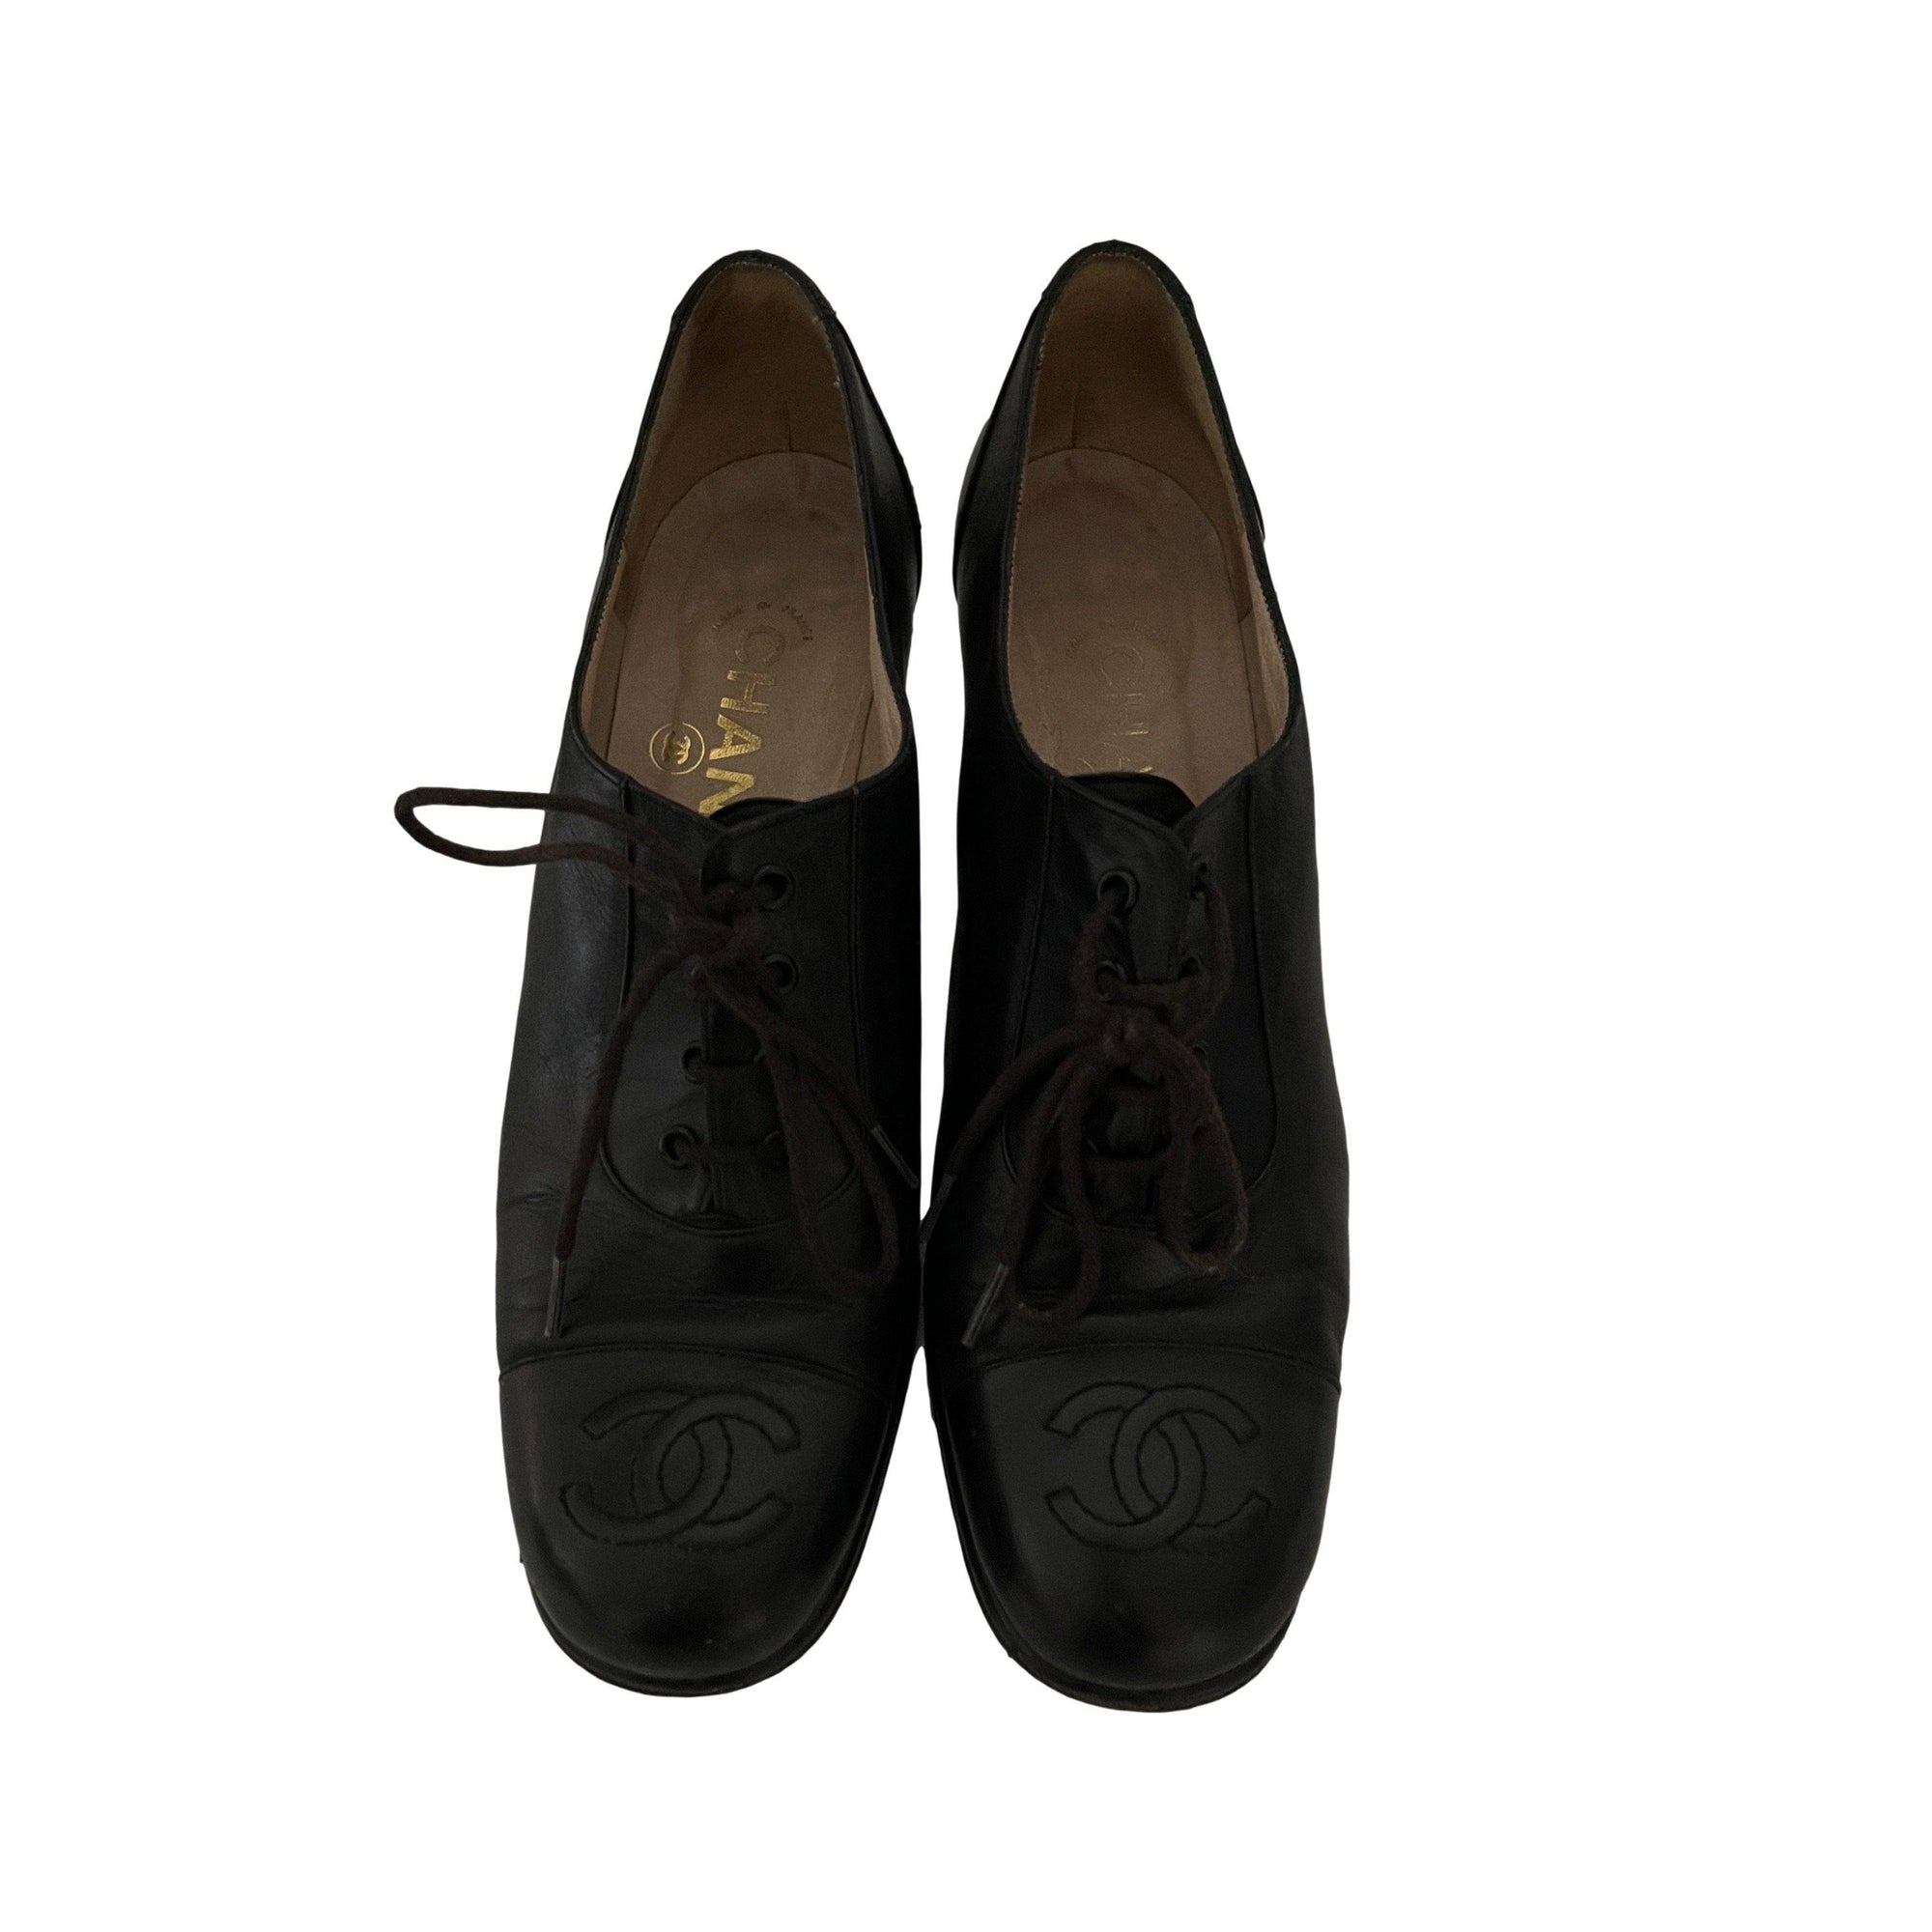 Chanel Black Logo Lace Up Oxford - Shoes